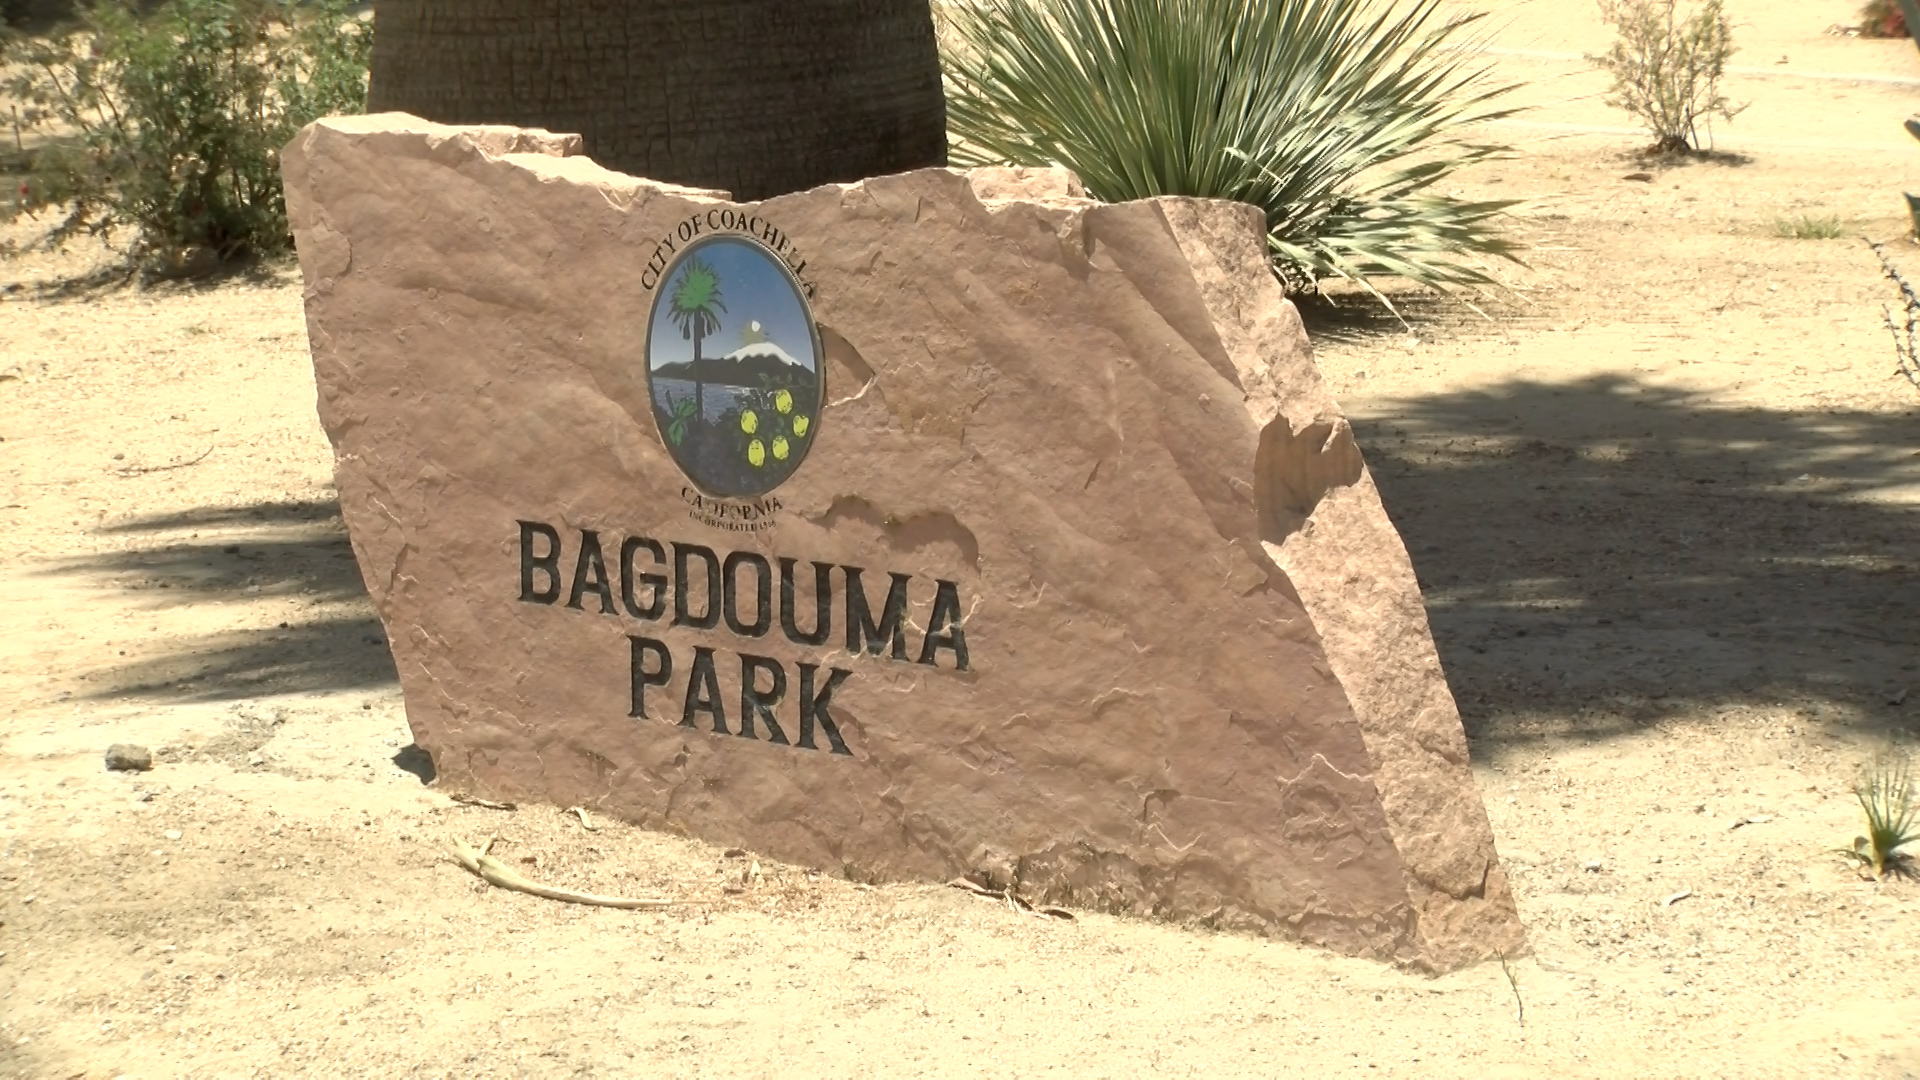 Efforts to renovate basketball courts in Bagdouma Park will begin